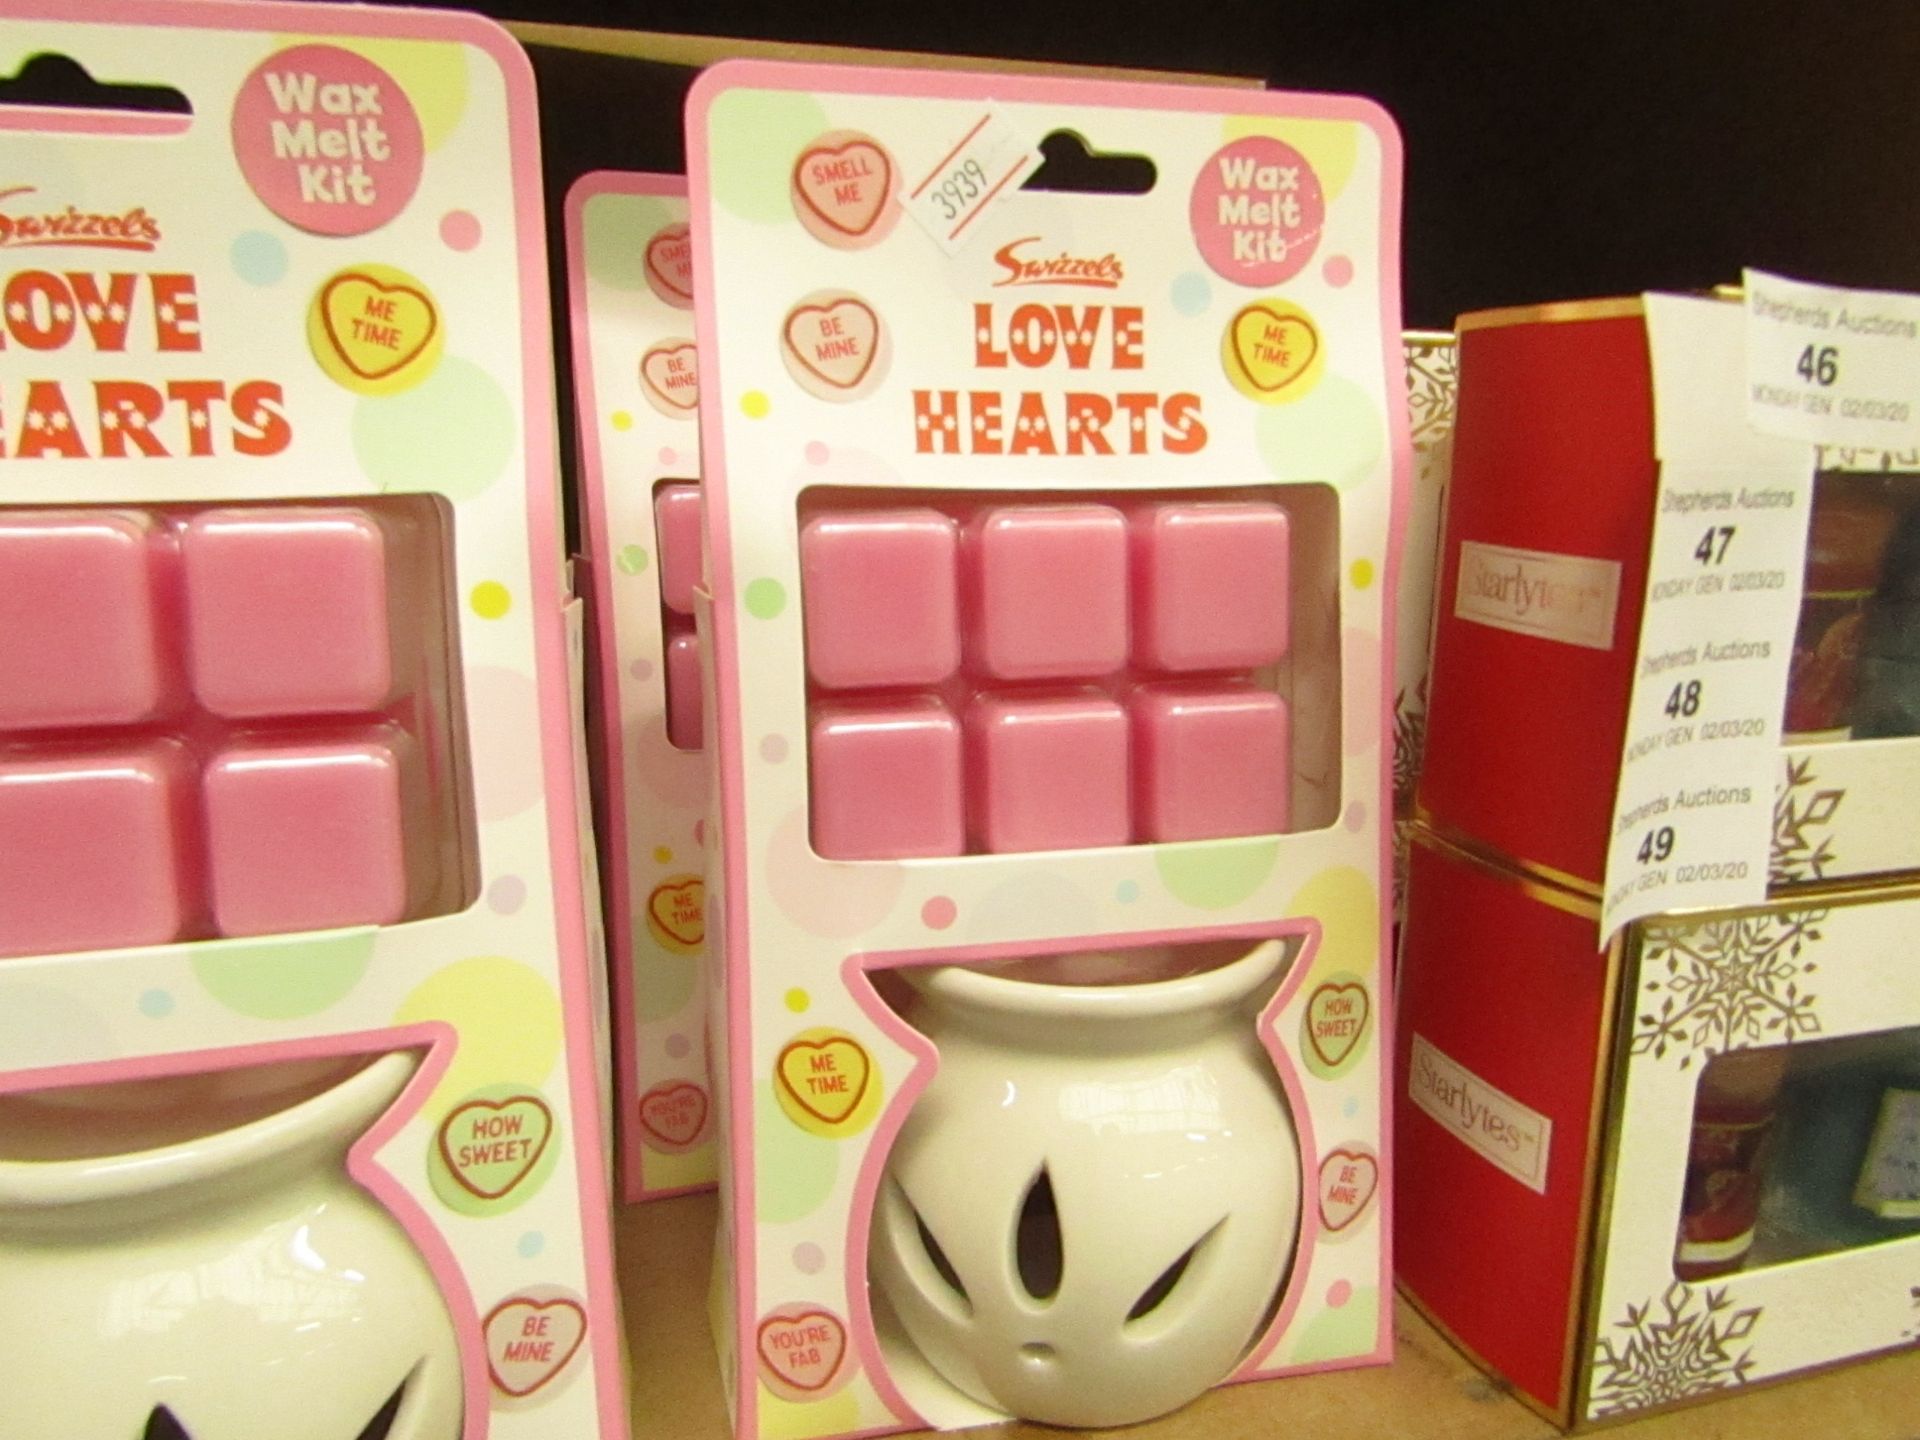 Swizzles Love Hearts Wax Melt Kit With Burner. New & Packaged